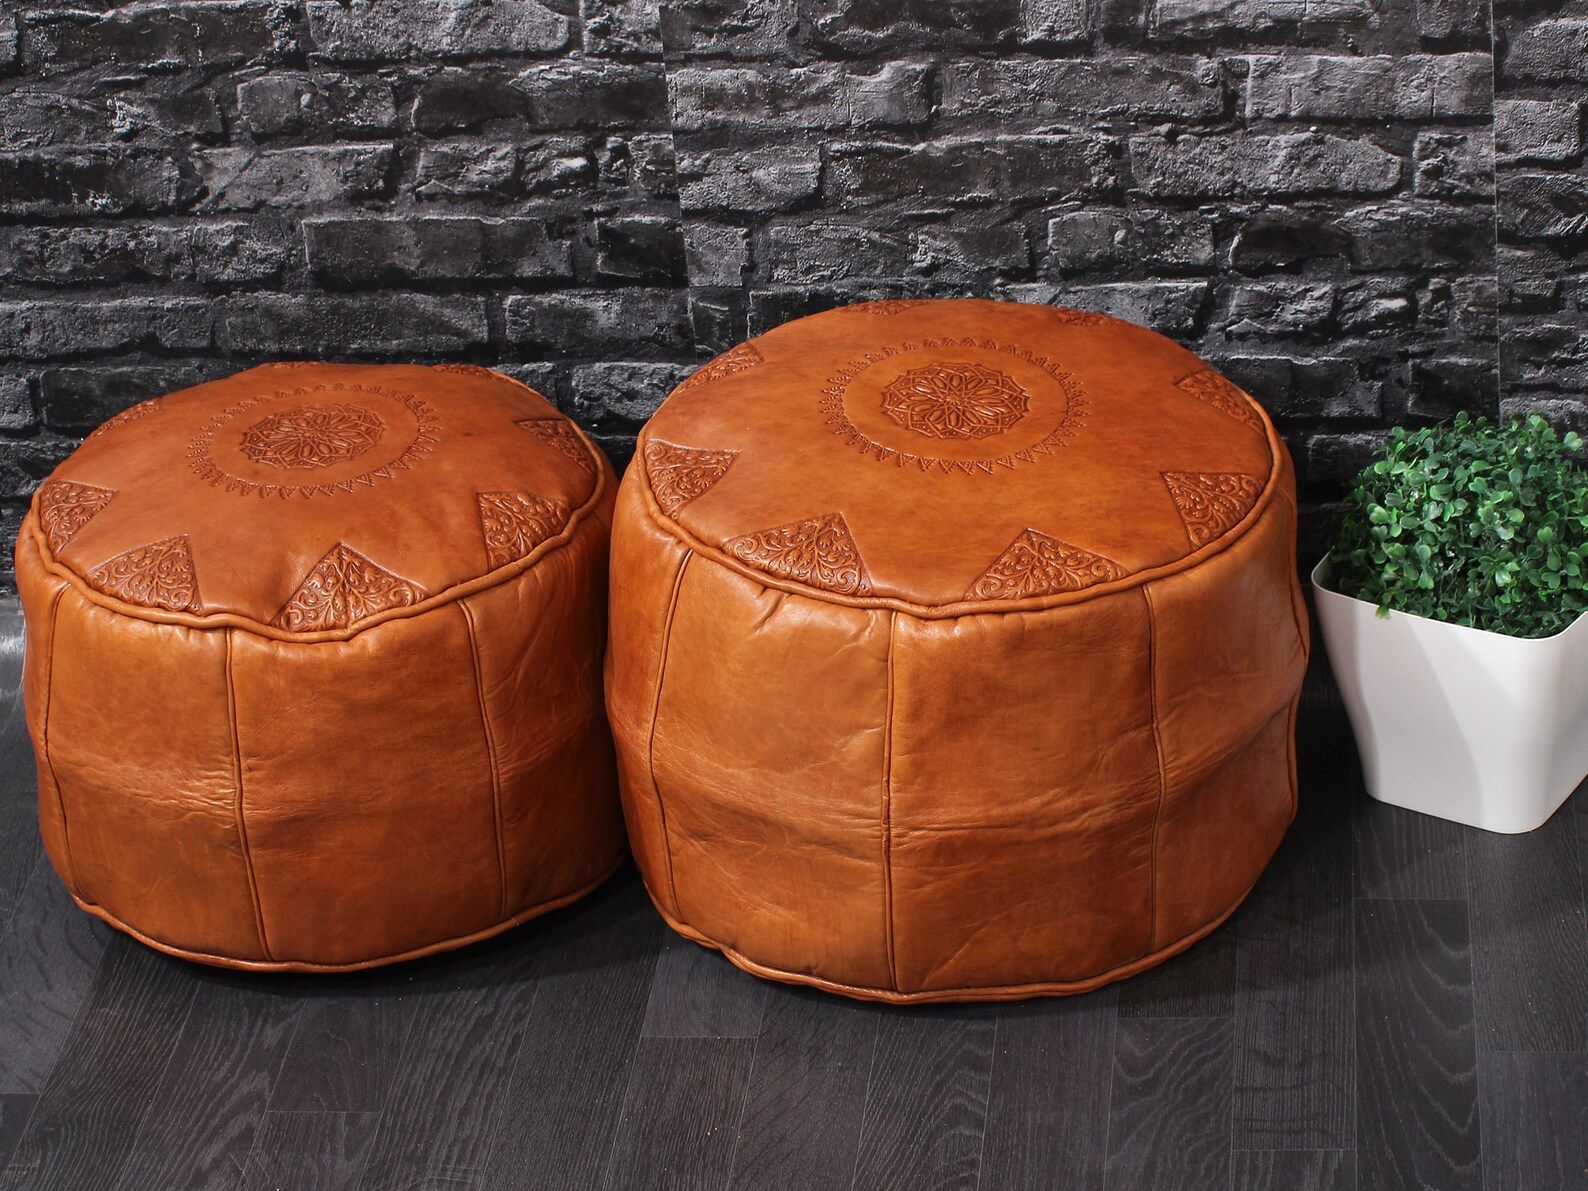 Set 2 Caramel Pouf Ottoman Leather Moroccan Pouf Footstool | Etsy Pertaining To Camber Caramel Leather Ottomans (View 15 of 17)